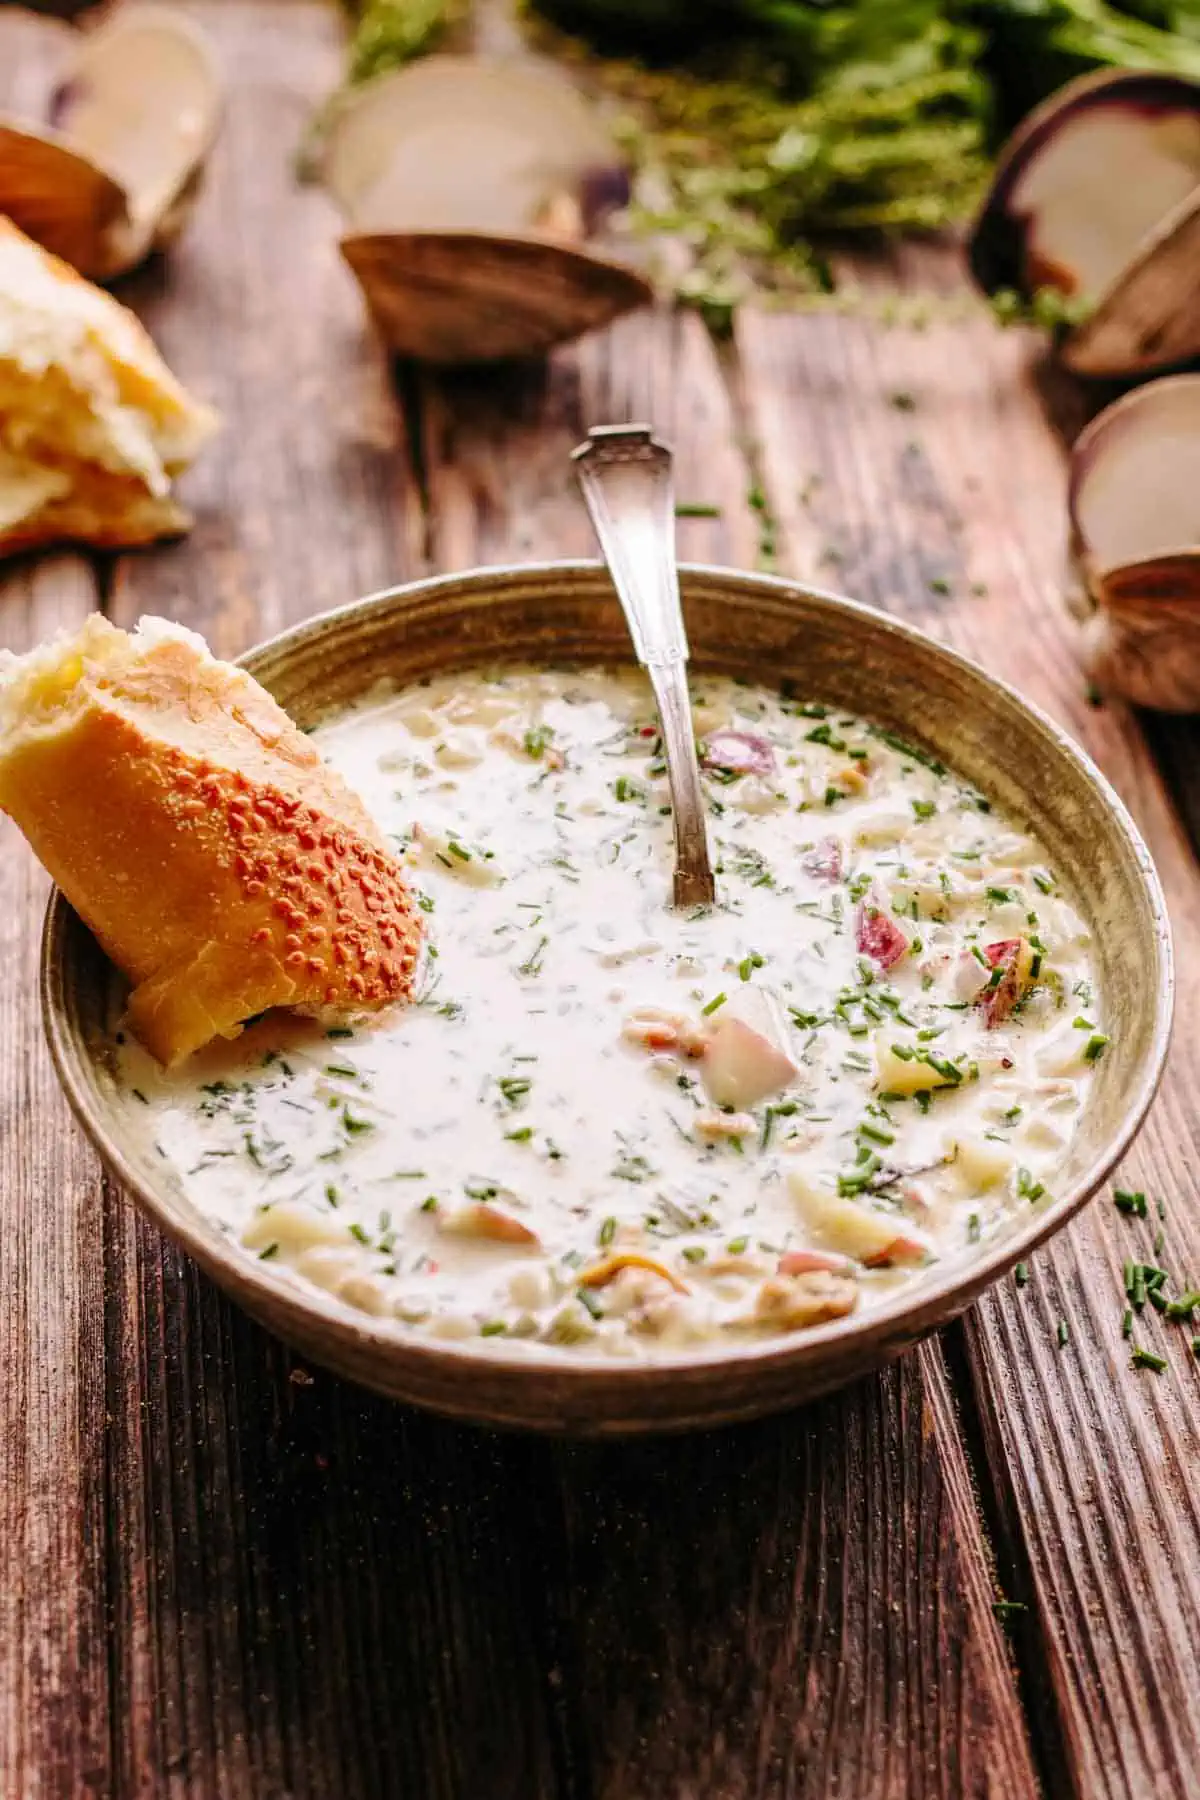 https://coleycooks.com/wp-content/uploads/2023/05/the-best-classic-creamy-new-england-clam-chowder-6.webp